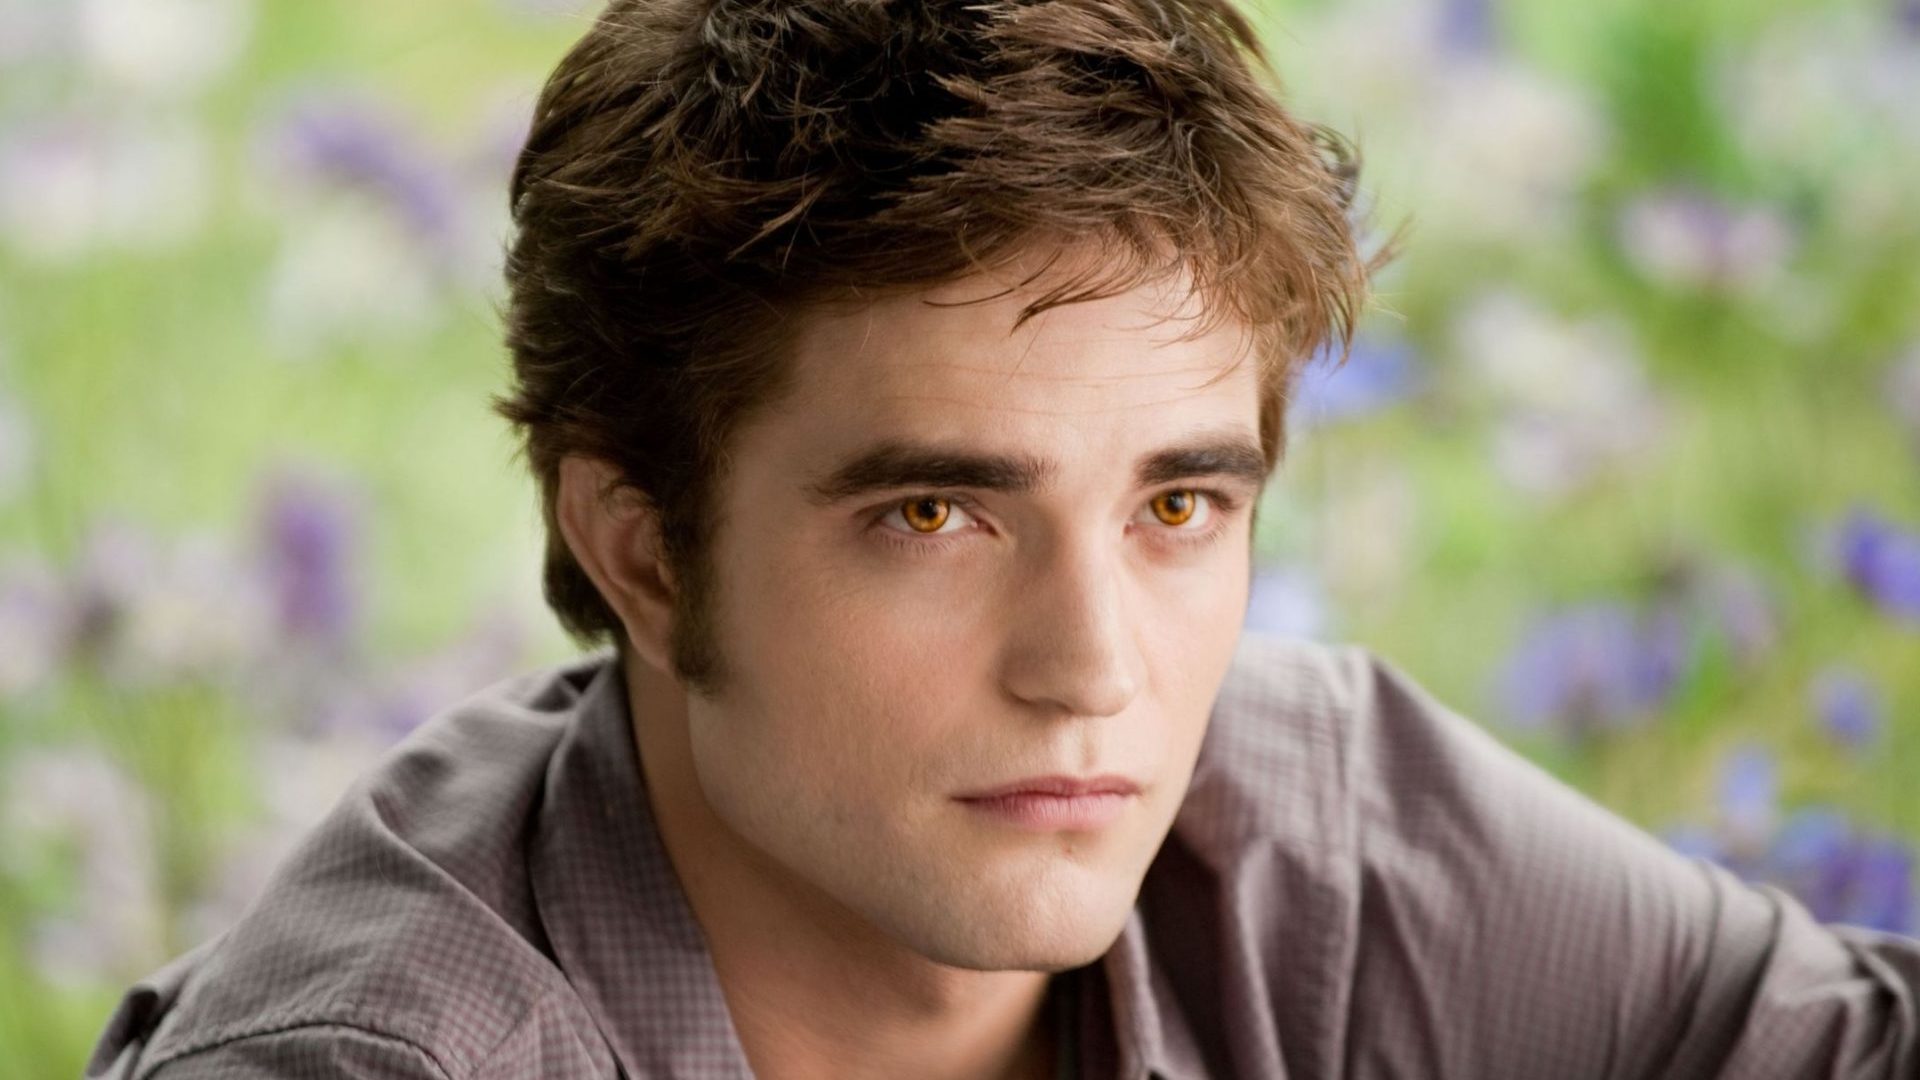 Robert Pattinson became famous for playing Edward Cullen, from 